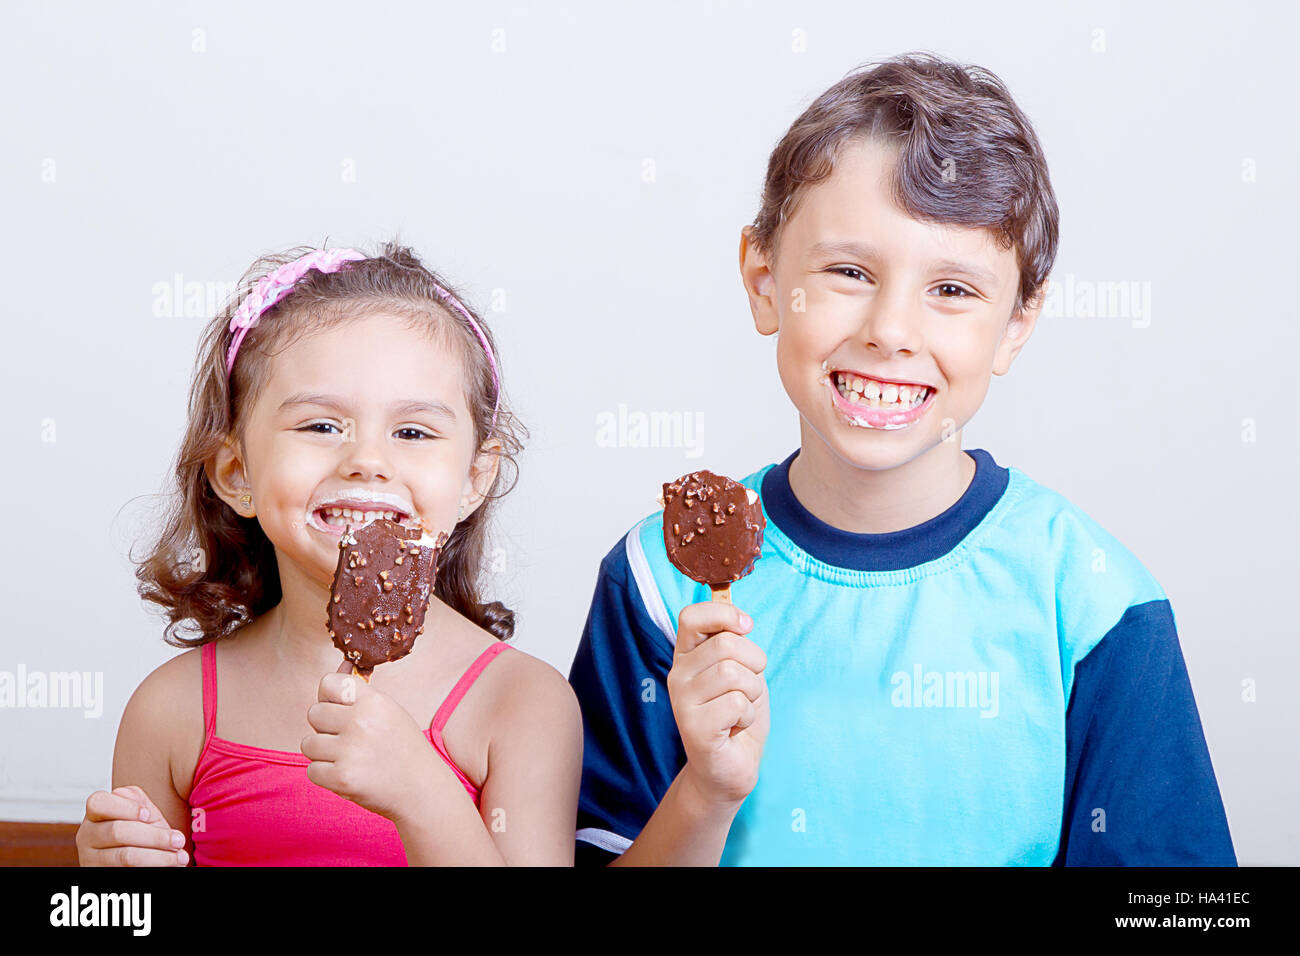 Young boy and girl feeling happy while eating chocolate ice cream bar Stock Photo